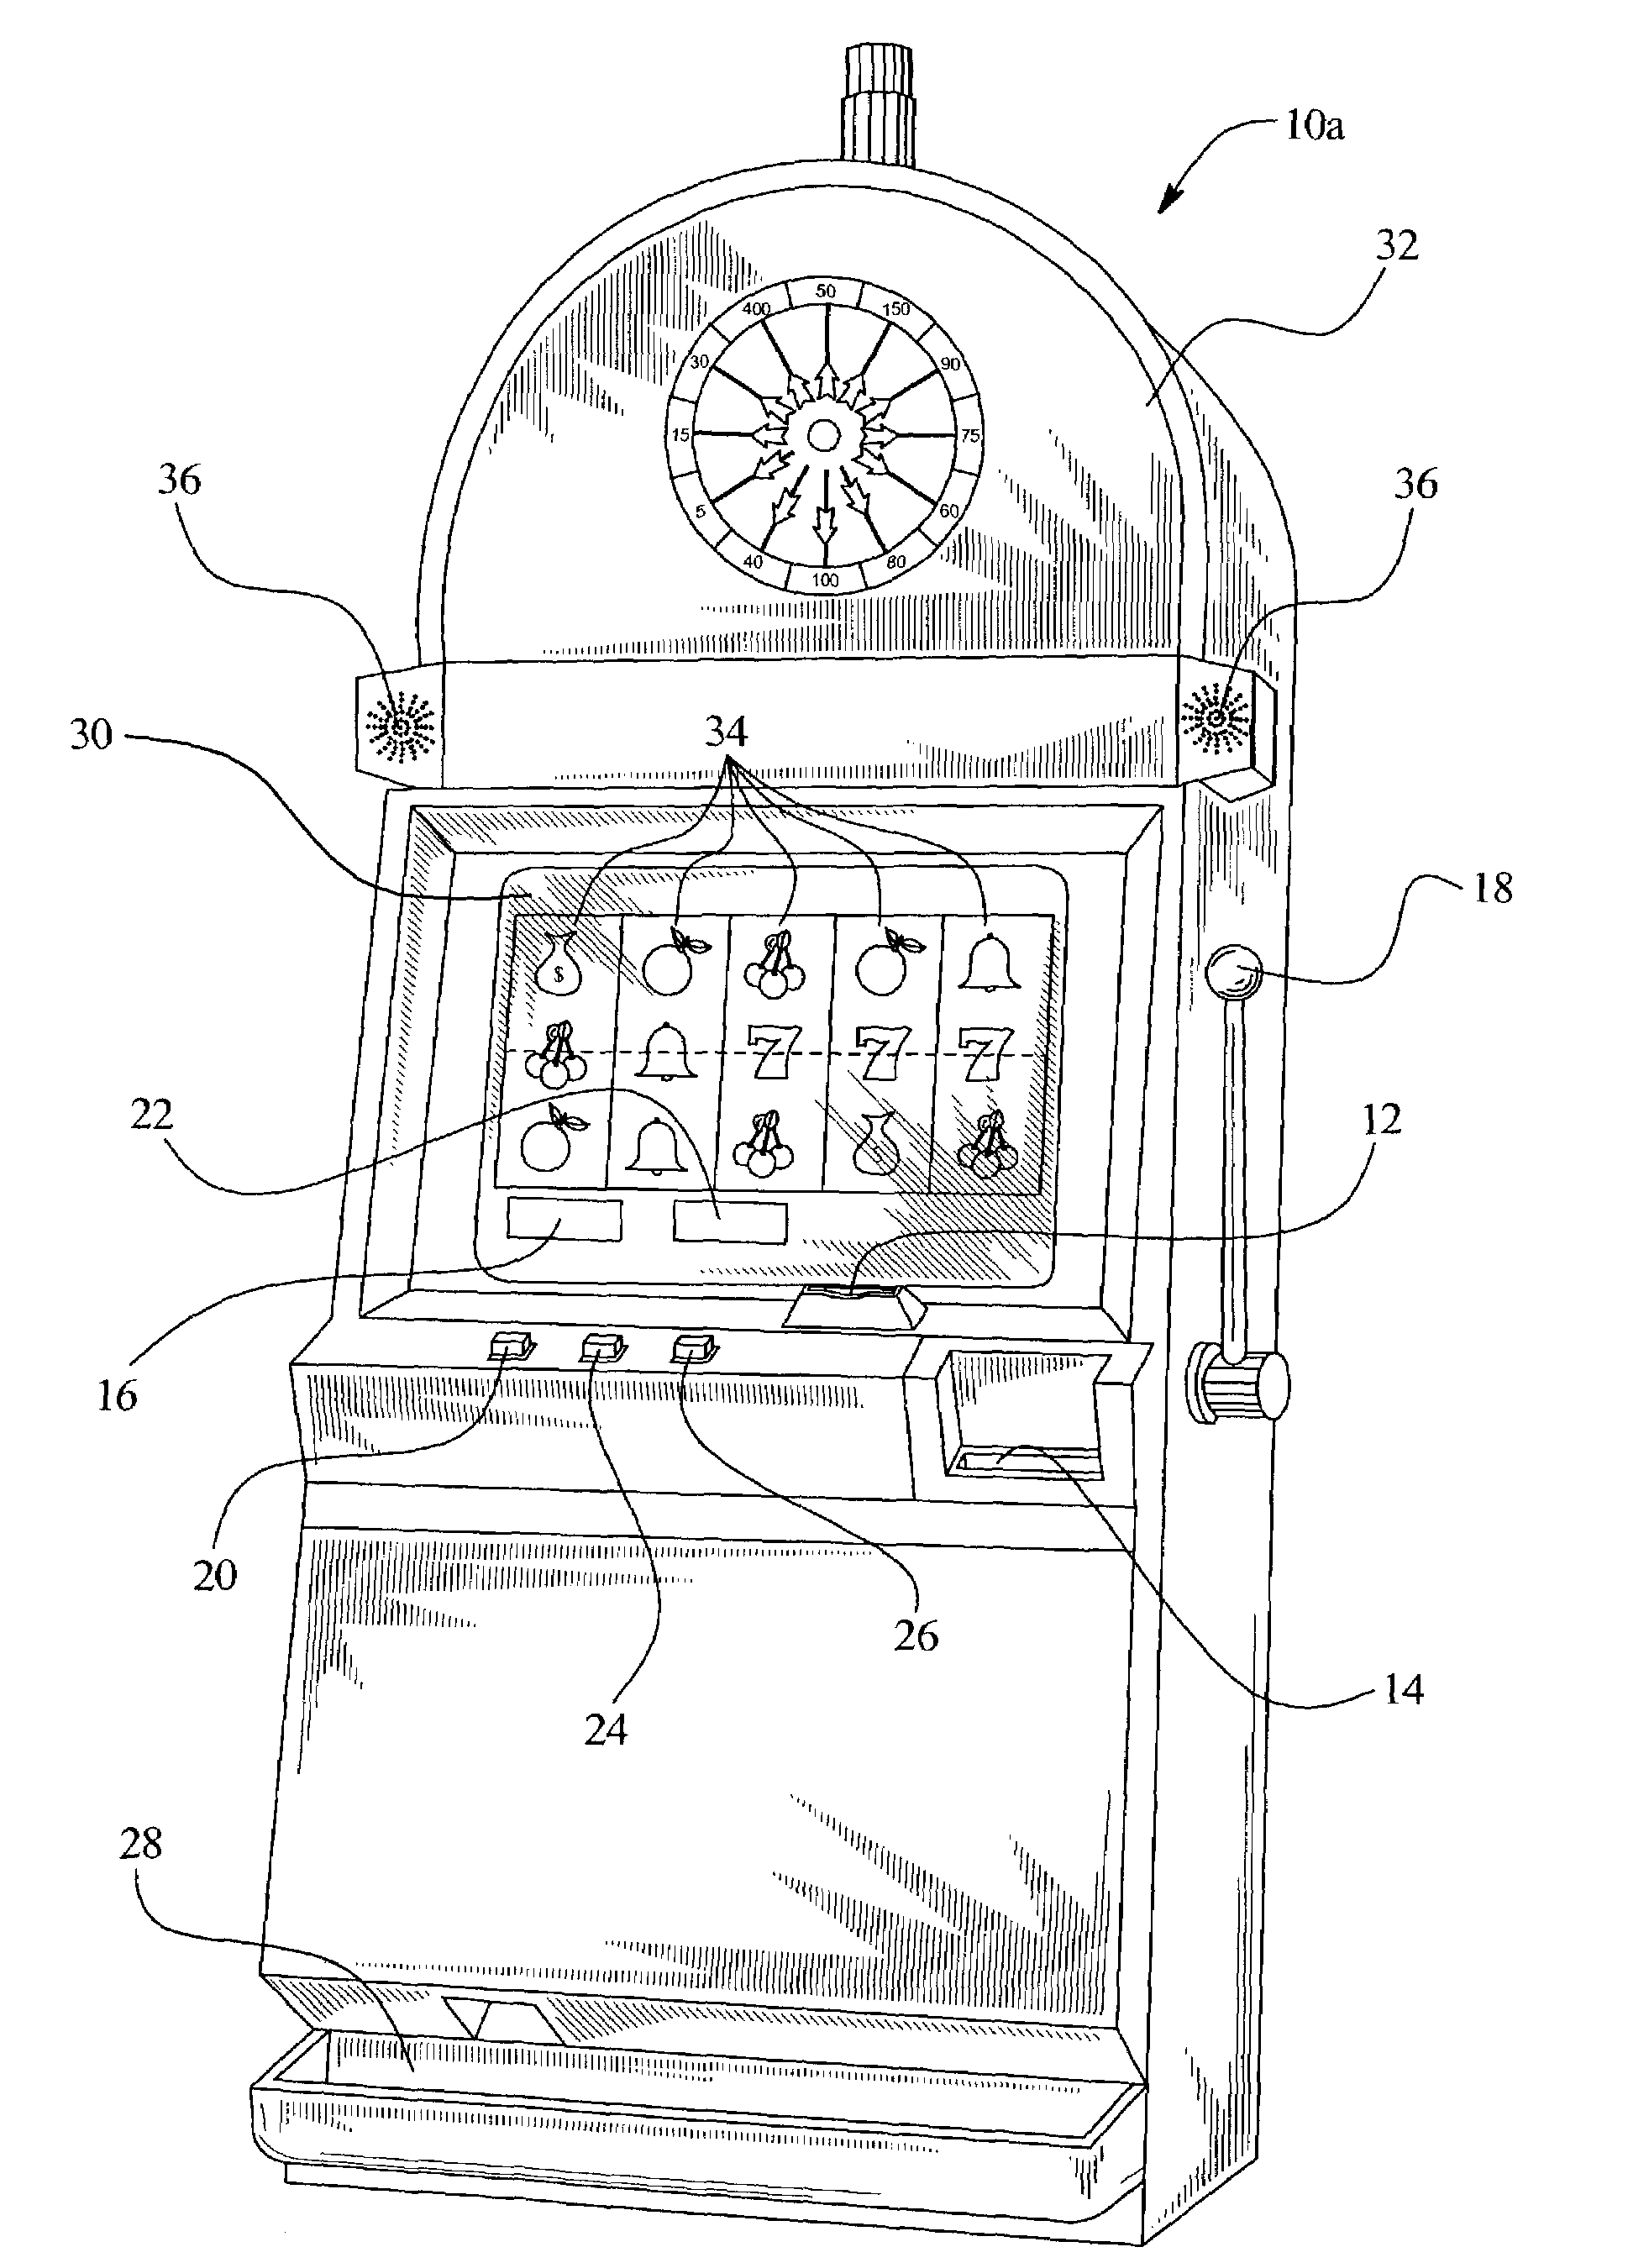 Gaming device having display with multiple radially translating indicators